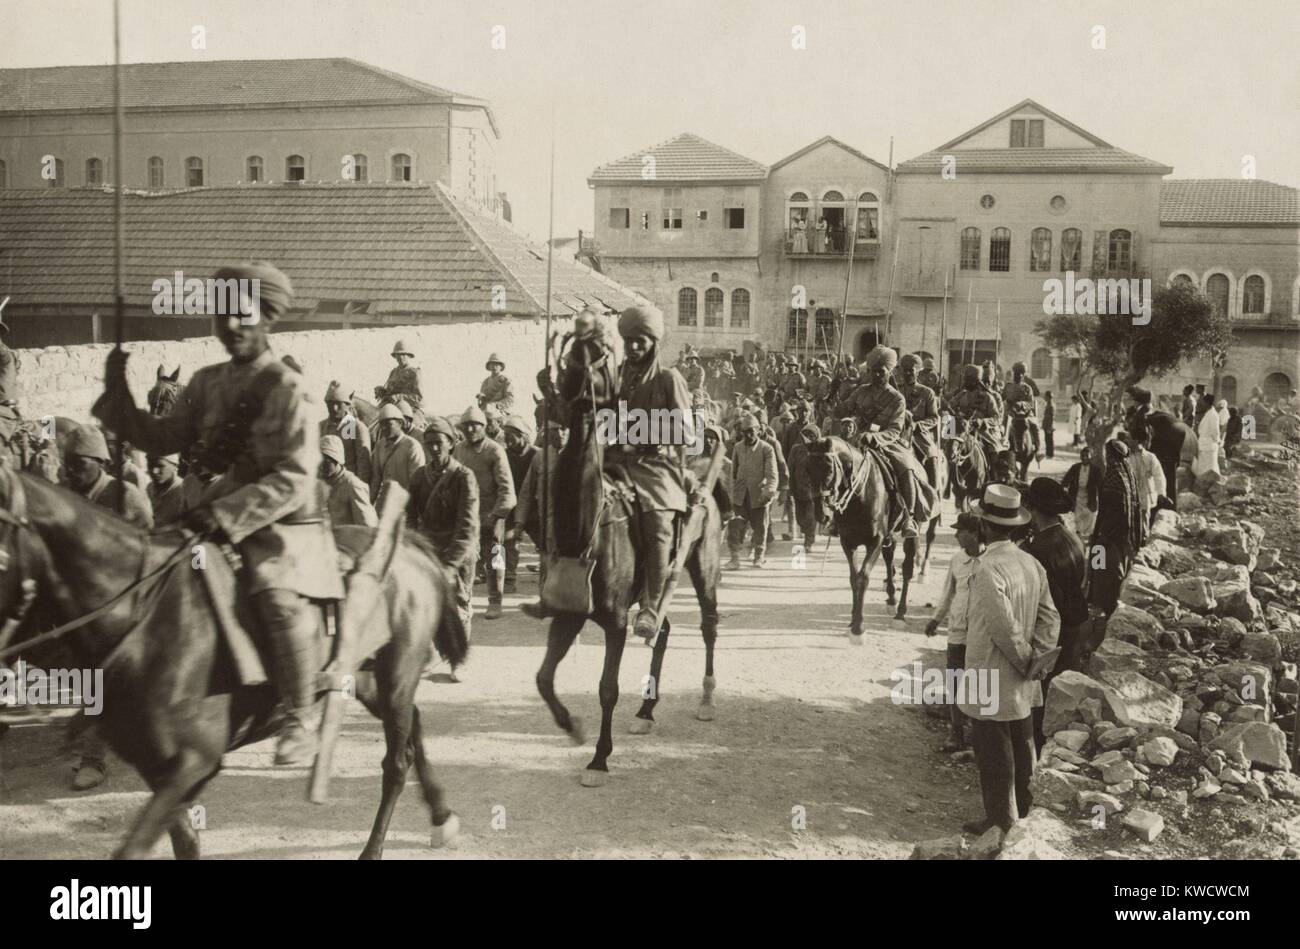 World War 1 in the Middle East. British Empire Indian Lancers guard marching Turkish prisoners in Palestine. 1918. (BSLOC 2013 1 75) Stock Photo